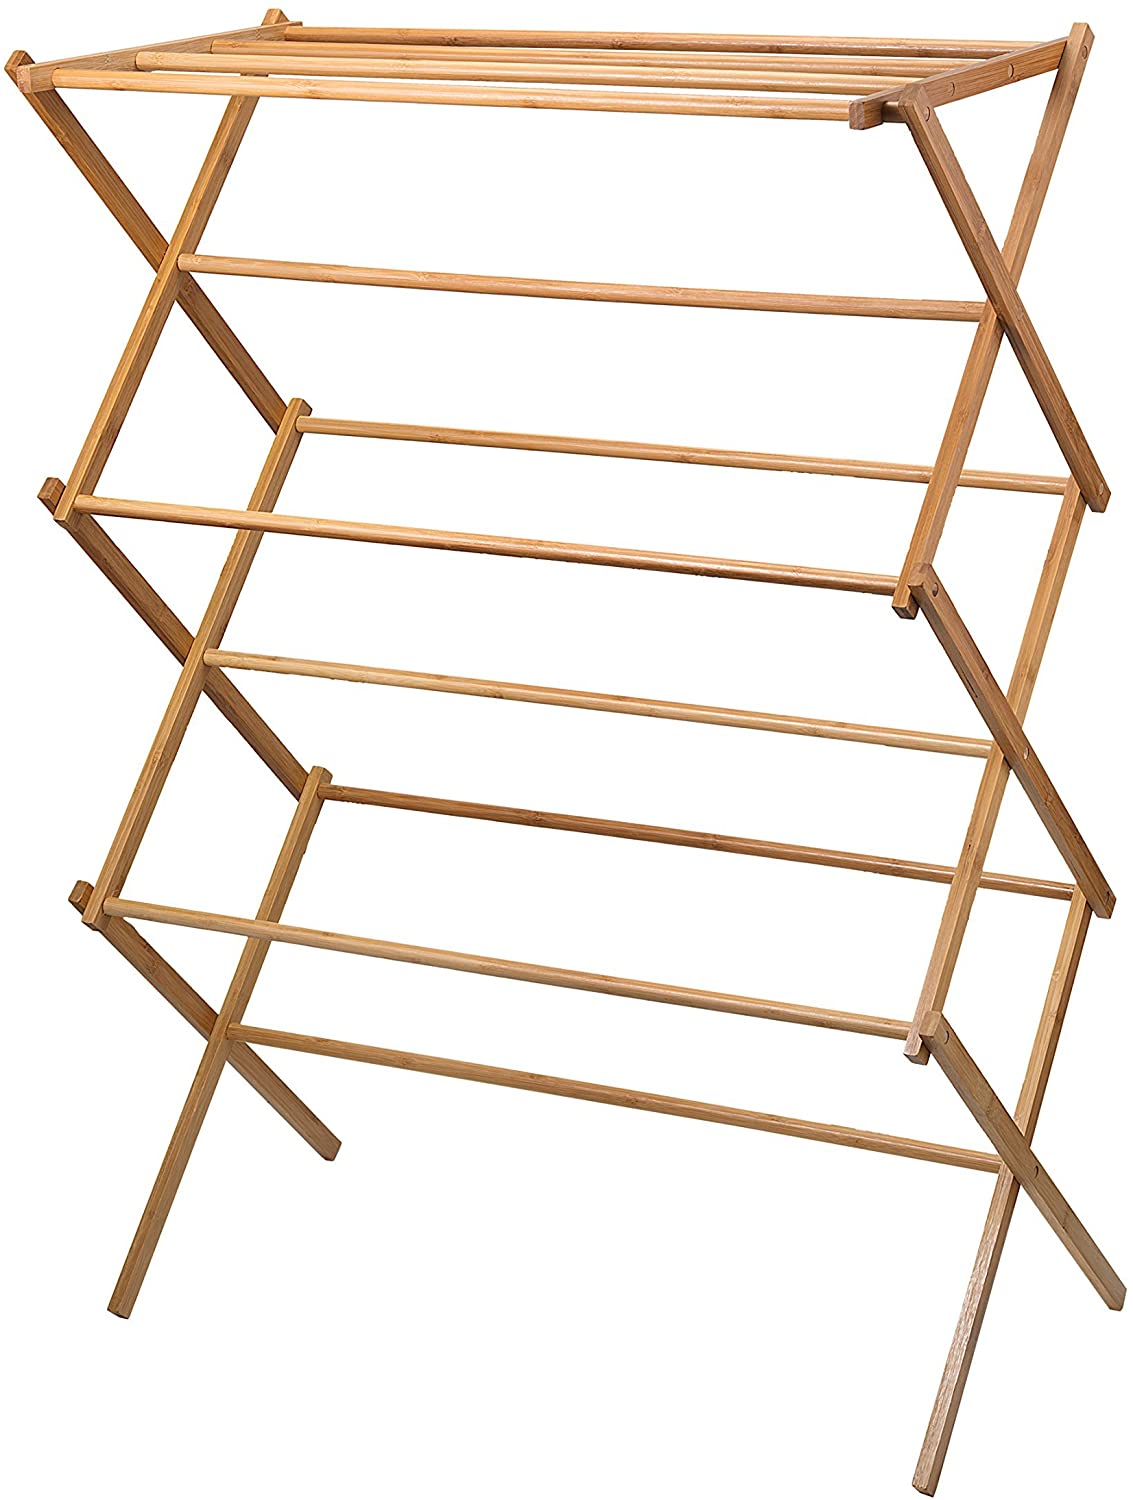 Home-it Compact Wood Drying Rack